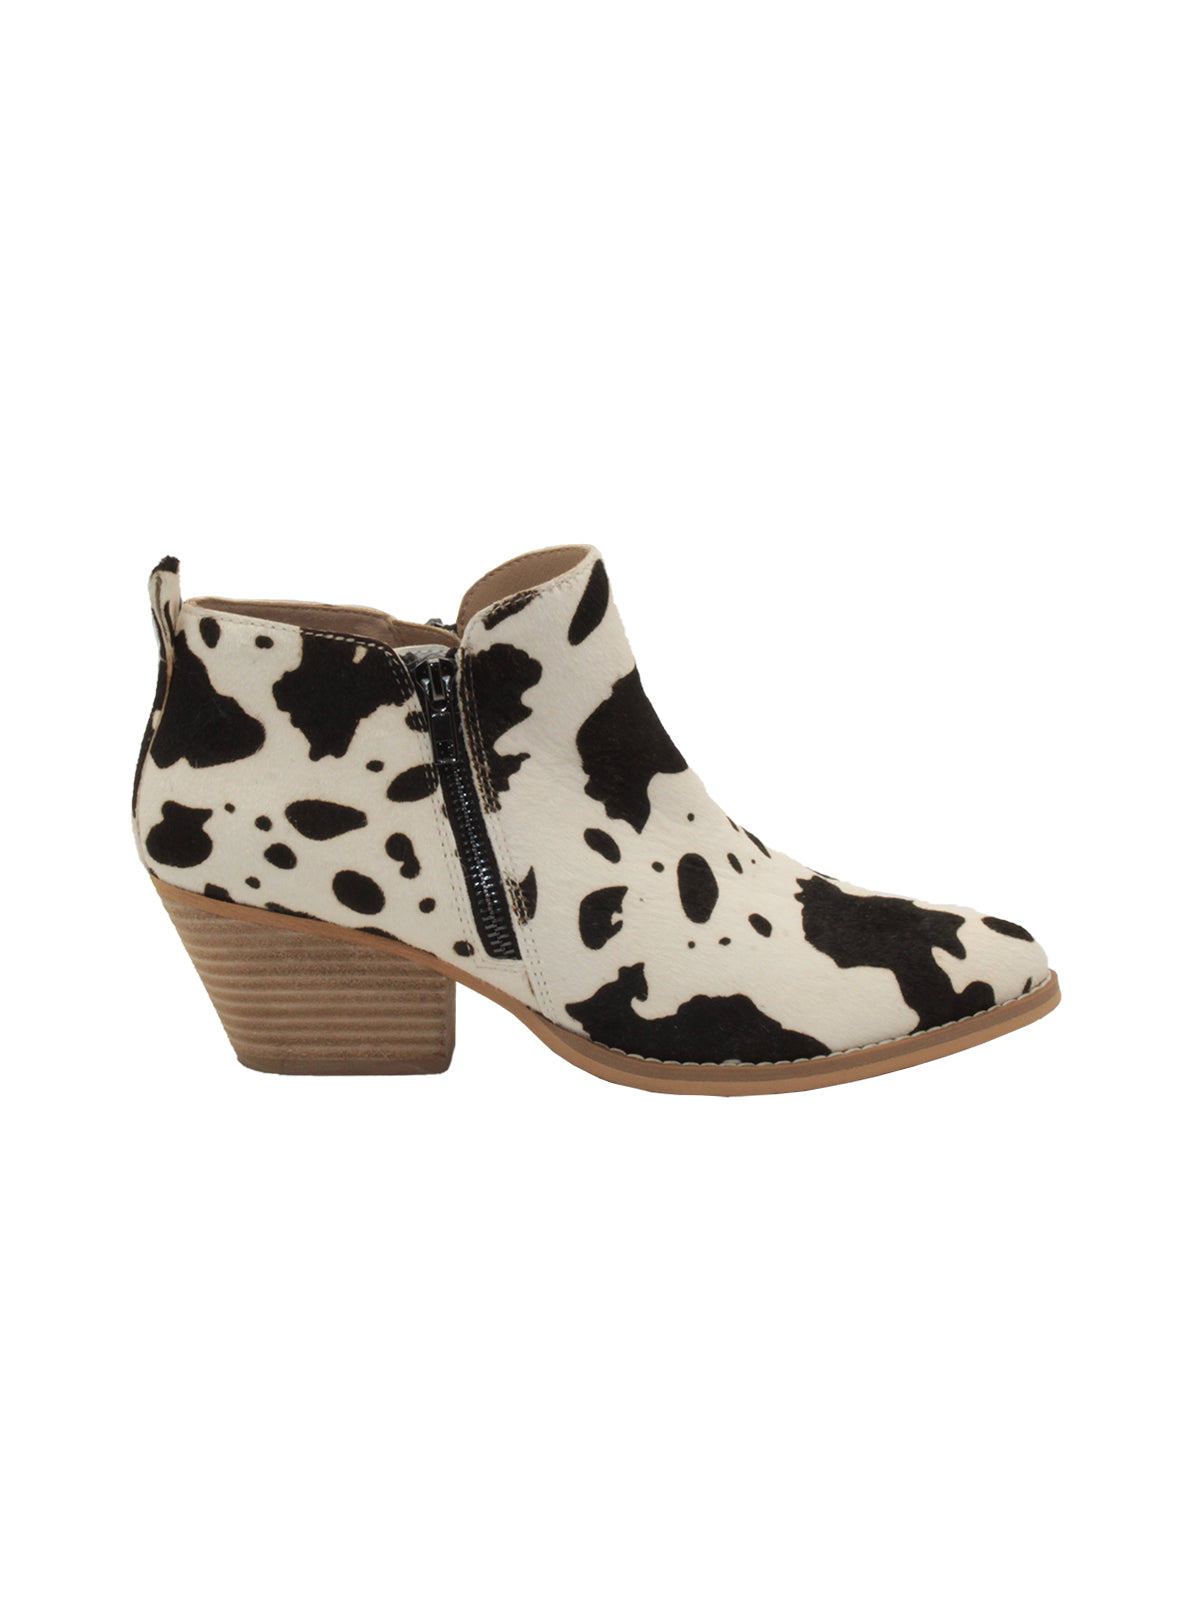 Western inspired Gracemont booties from Very Volatile refresh your wardrobe with on-trend animal print in genuine calf hair. The functioning metal side zippers mean you can slip these on with your favorite pair of jeans and head straight into the weekend.  black white cow